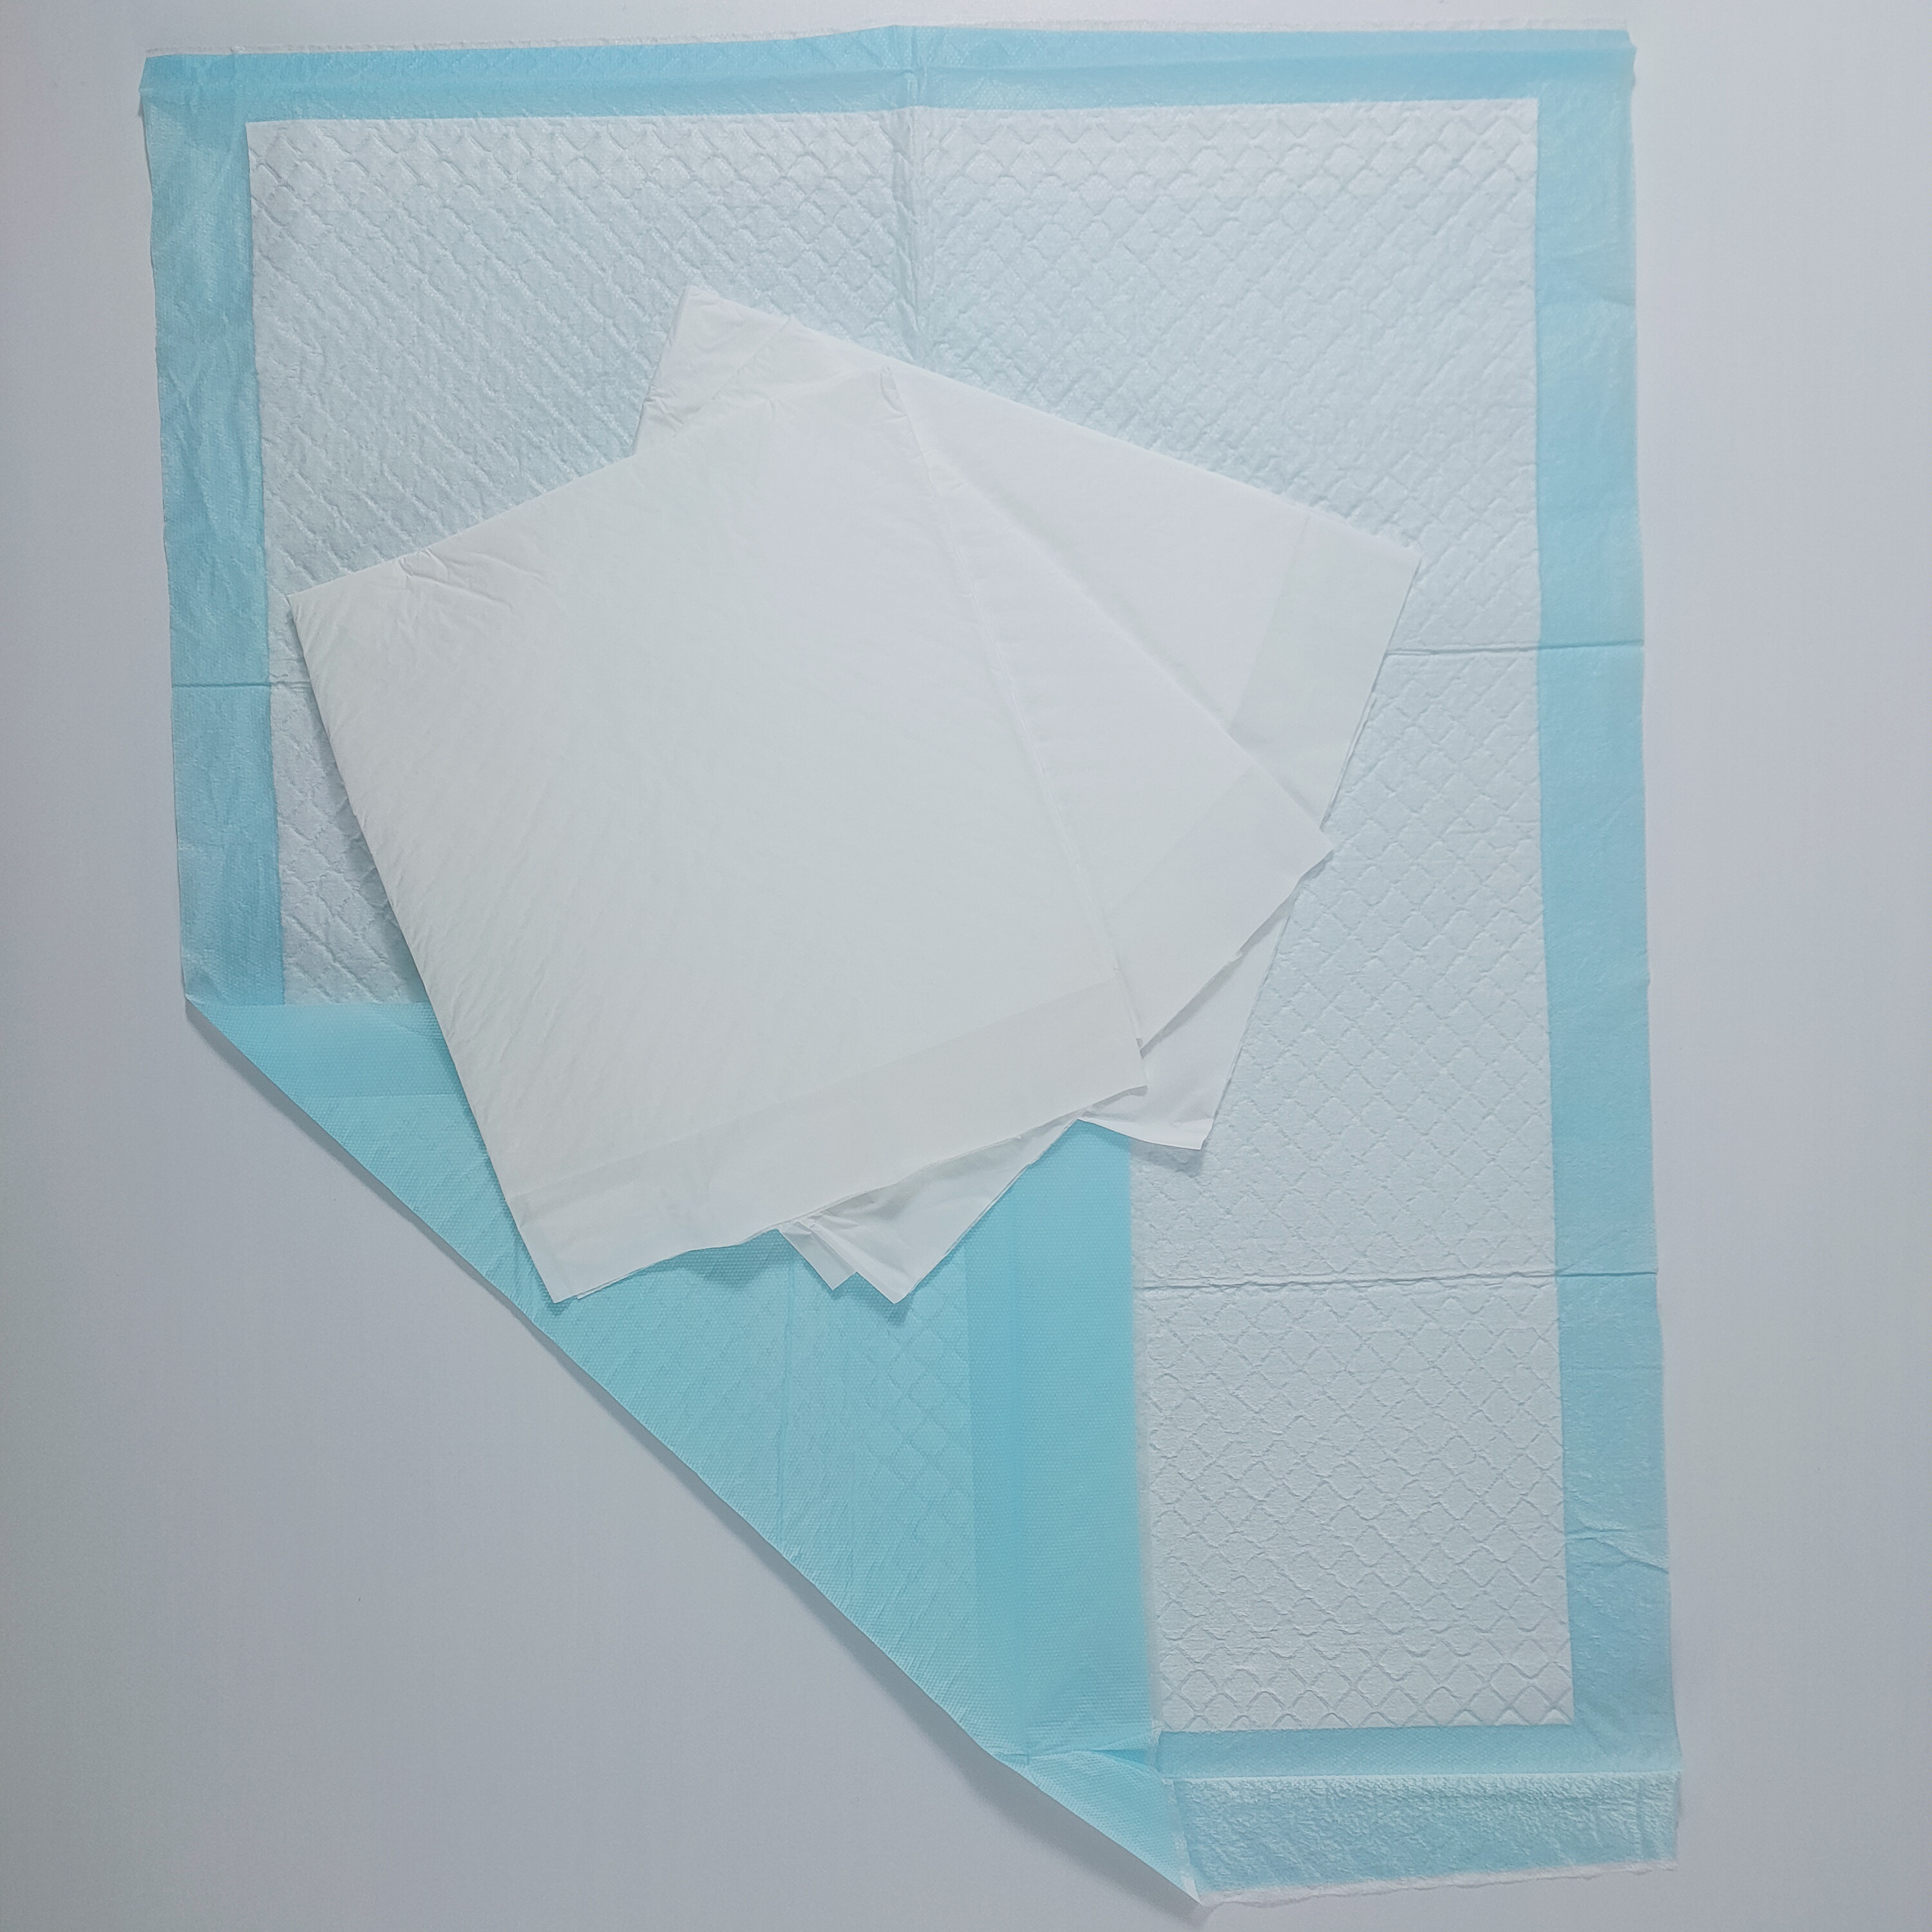 DISPOSABLE UNDERPADS FOR ADULTS MADE BY CHINA MANUFACTURE FOUND IN 1996